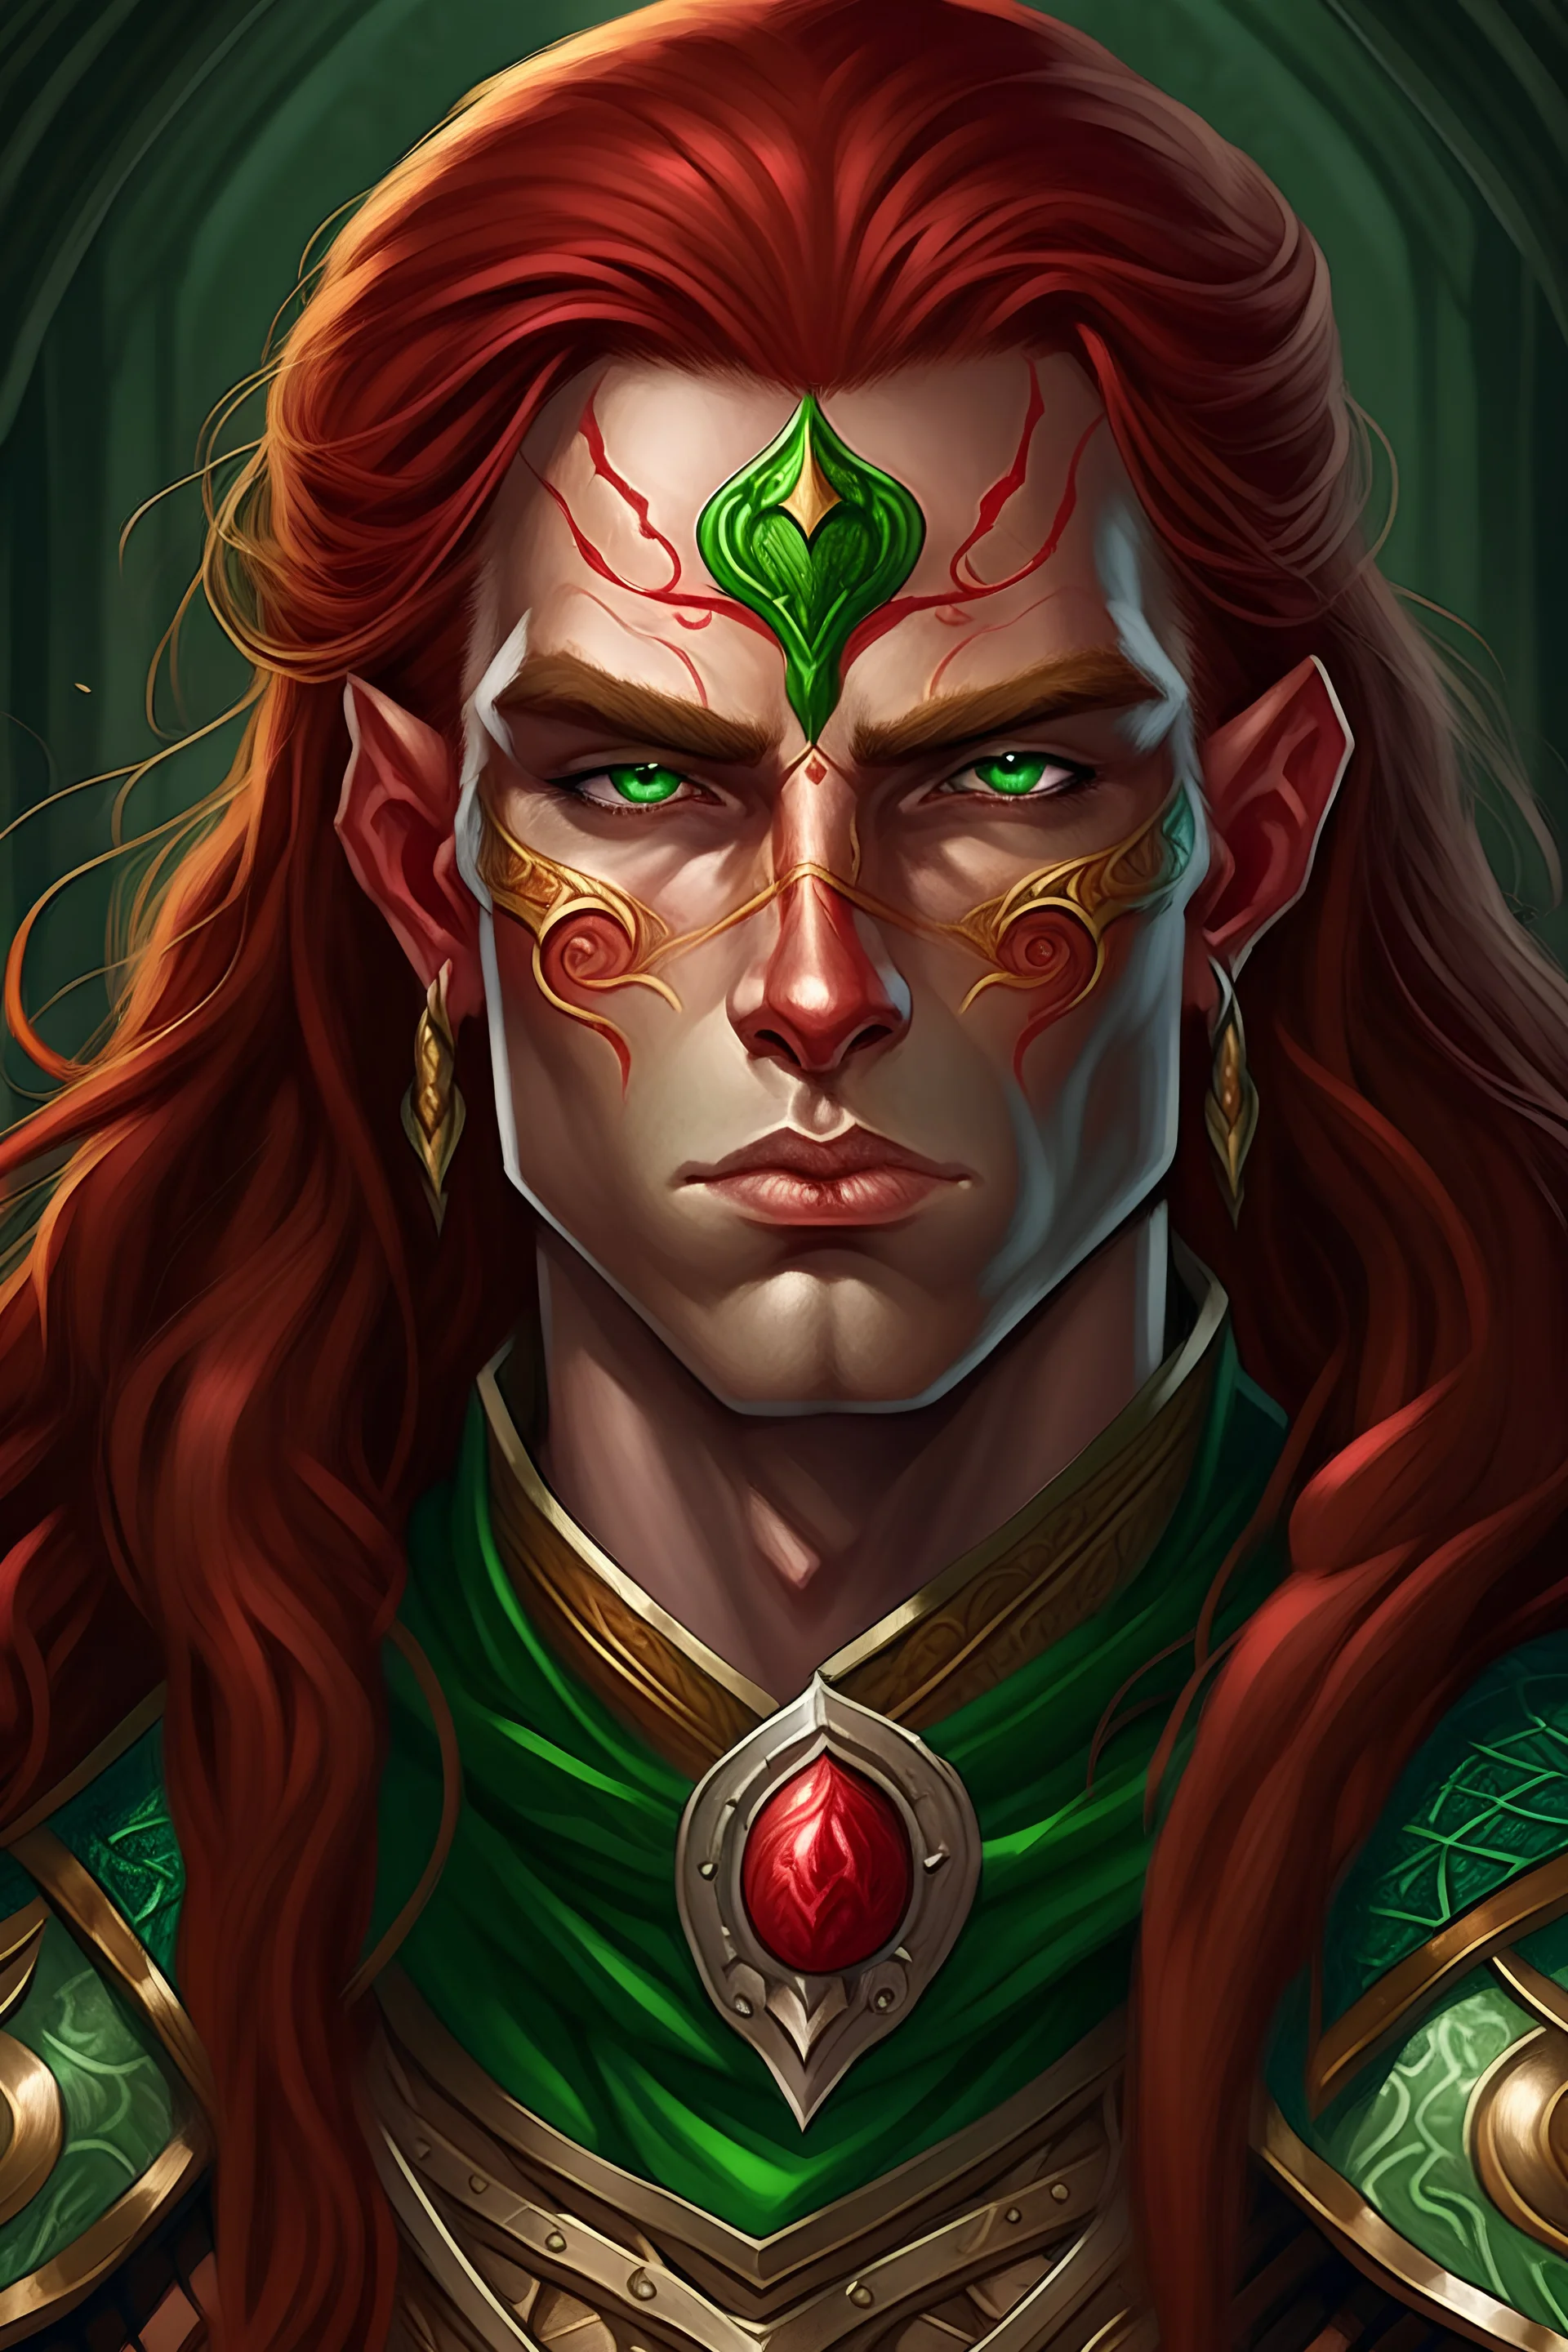 Generate a dungeons and dragons character portrait of the face of a young male Githyanki githyanki who is tall and well built with a red right eye and a green left one and has long hazel hair in heavy armor and a sword on his back